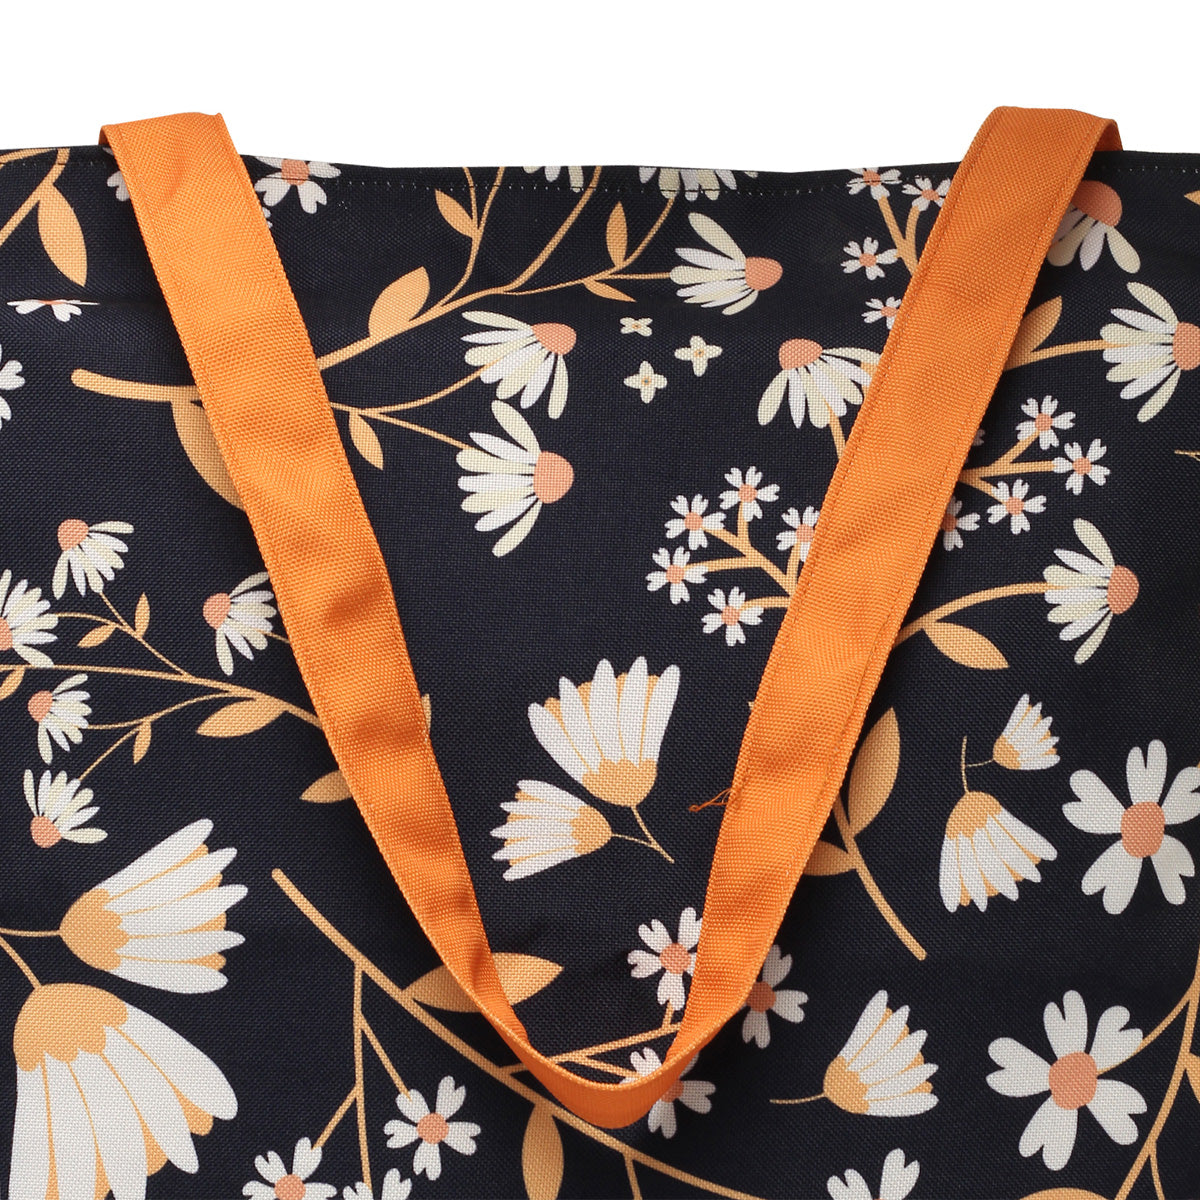 zoom view of Tote bag featuring colorful flowers and orange straps.